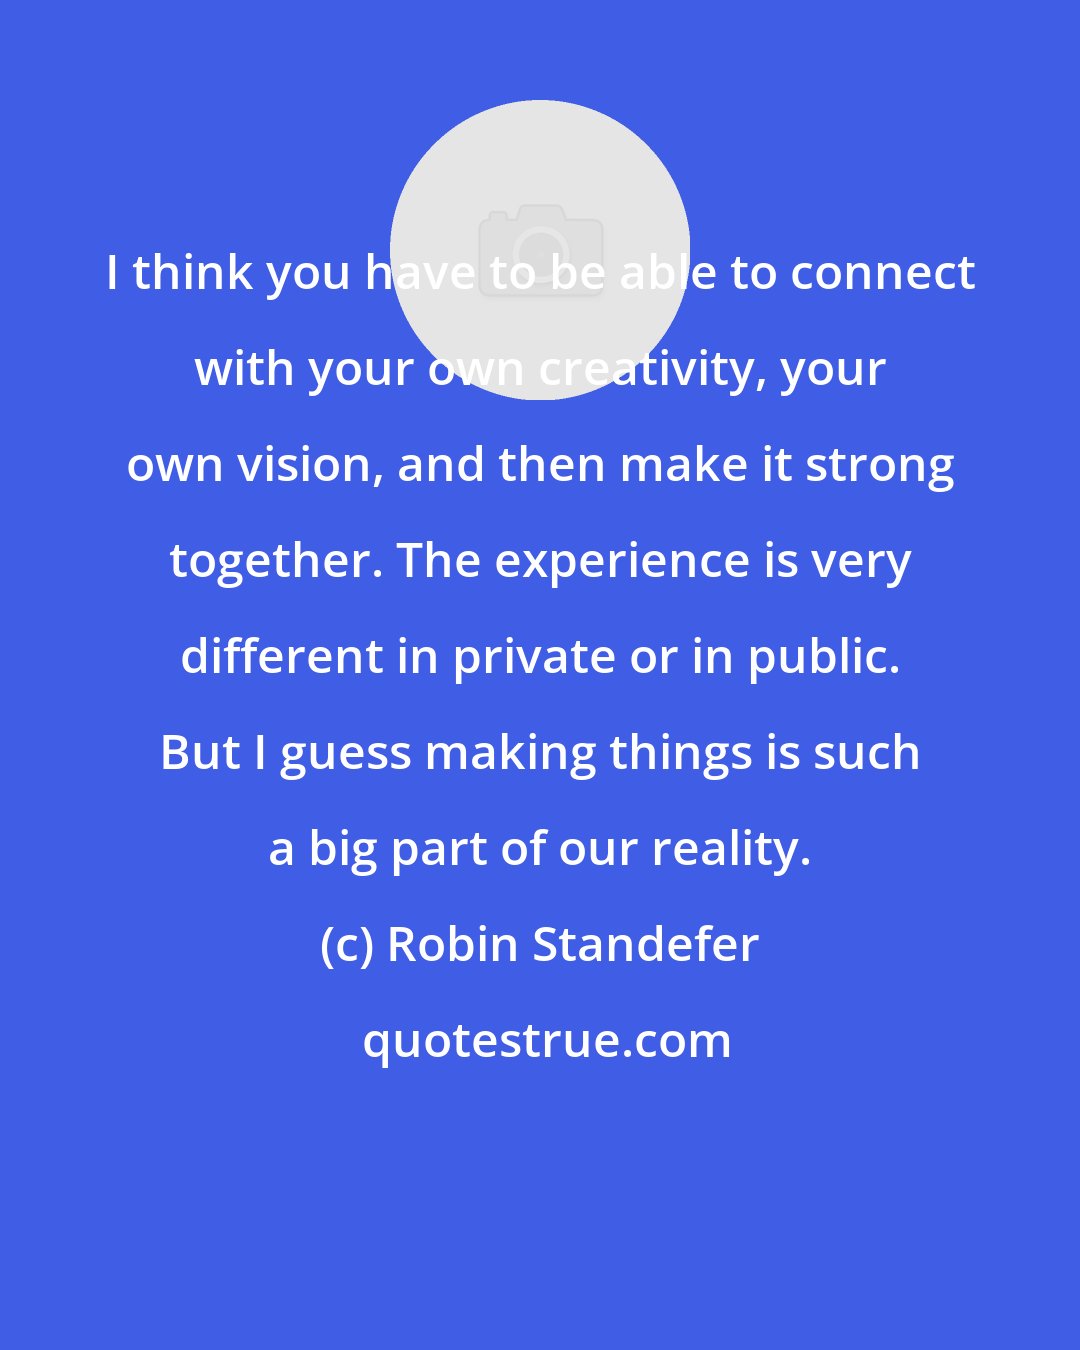 Robin Standefer: I think you have to be able to connect with your own creativity, your own vision, and then make it strong together. The experience is very different in private or in public. But I guess making things is such a big part of our reality.